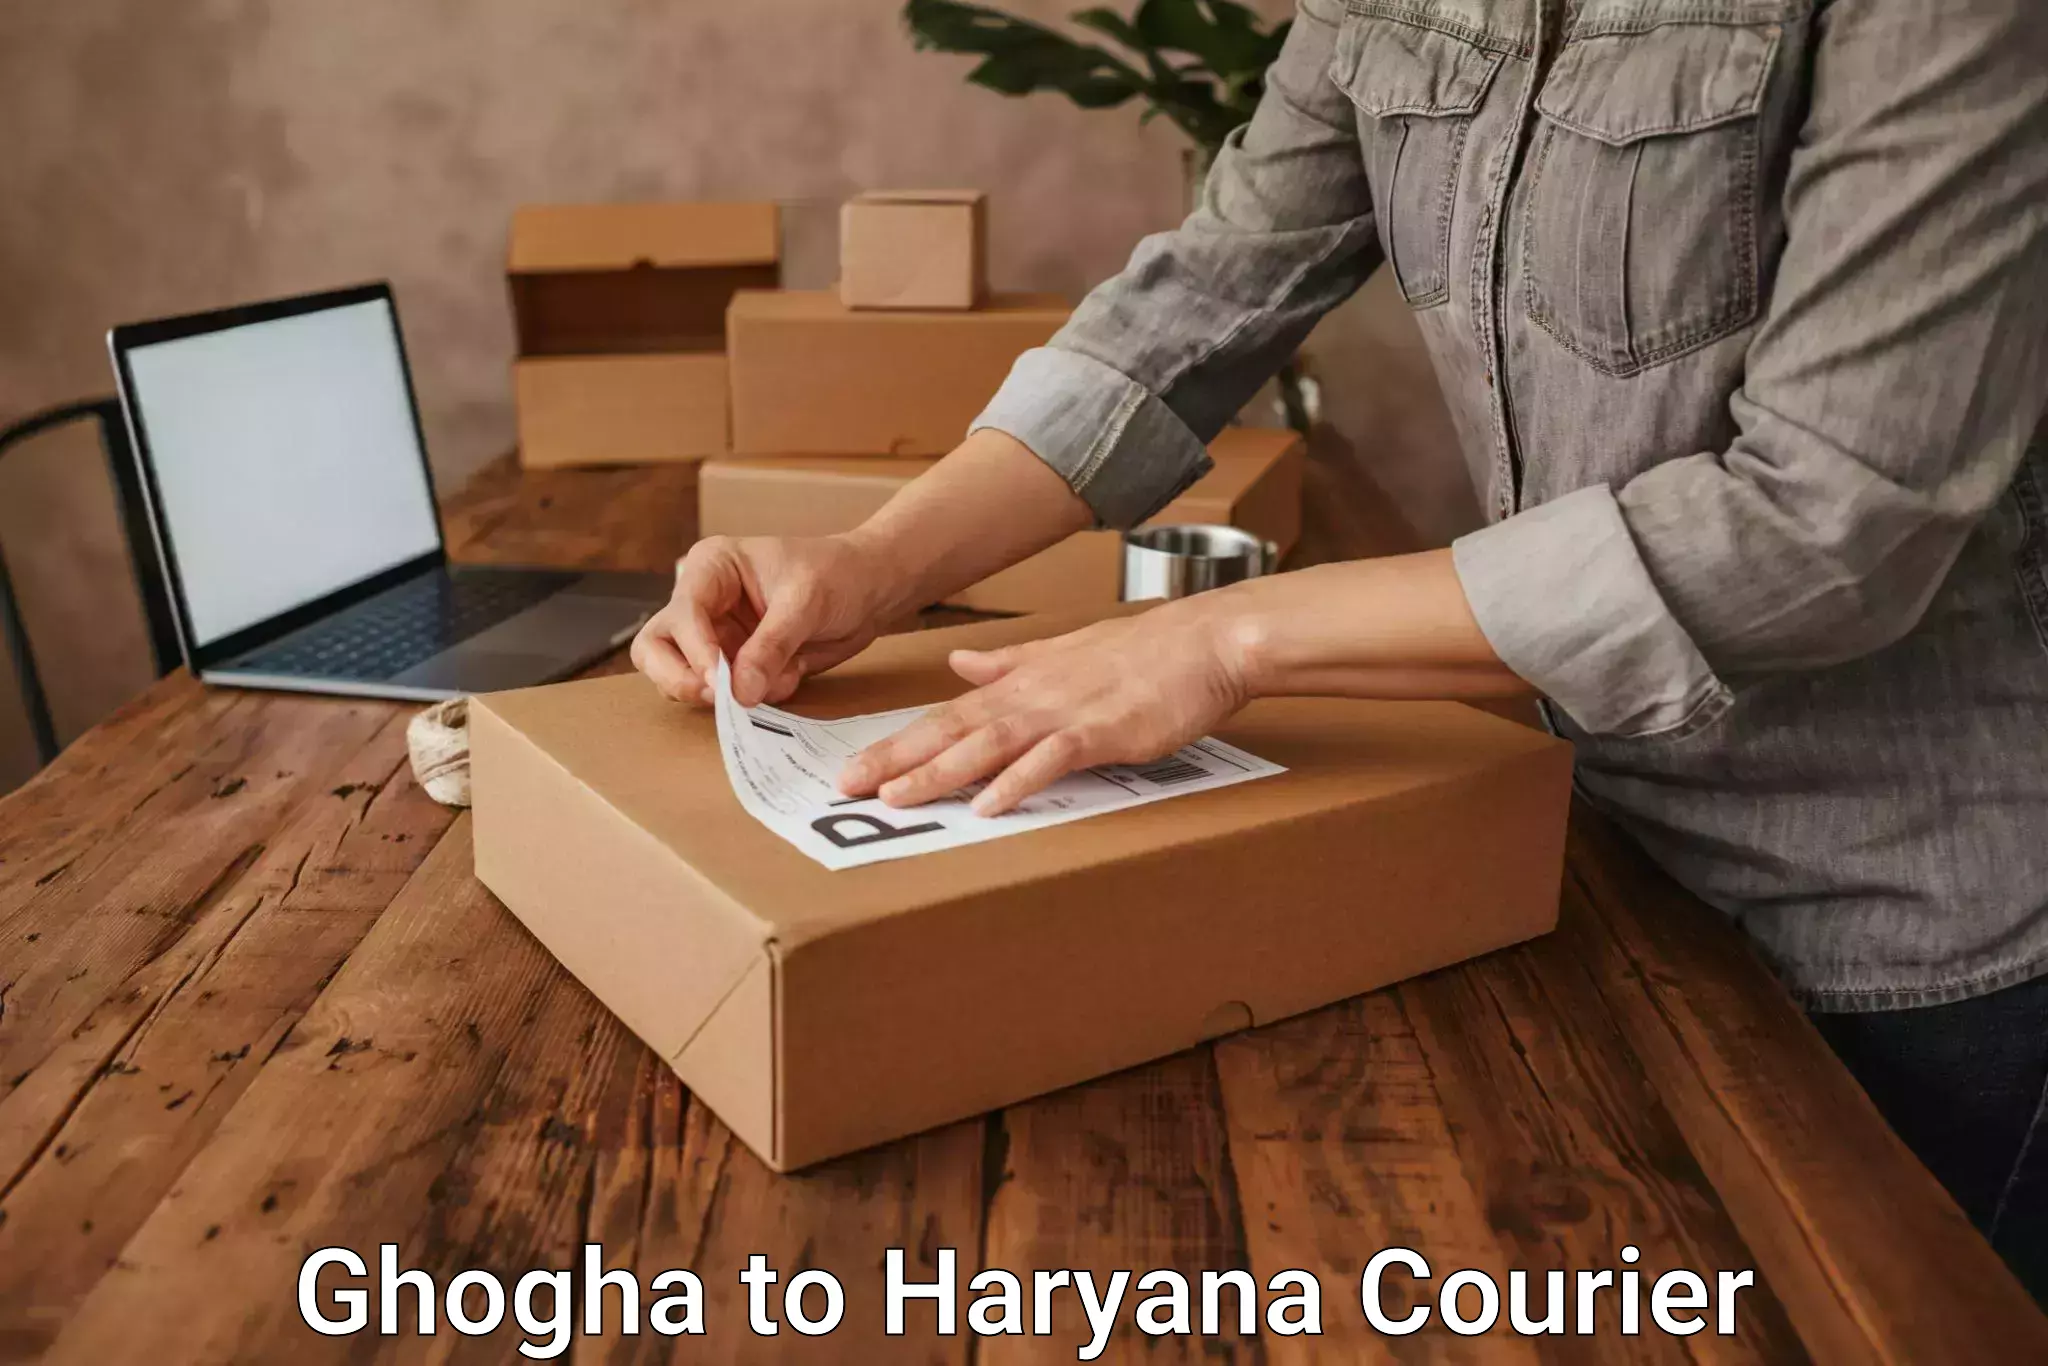 Furniture transport specialists Ghogha to Haryana